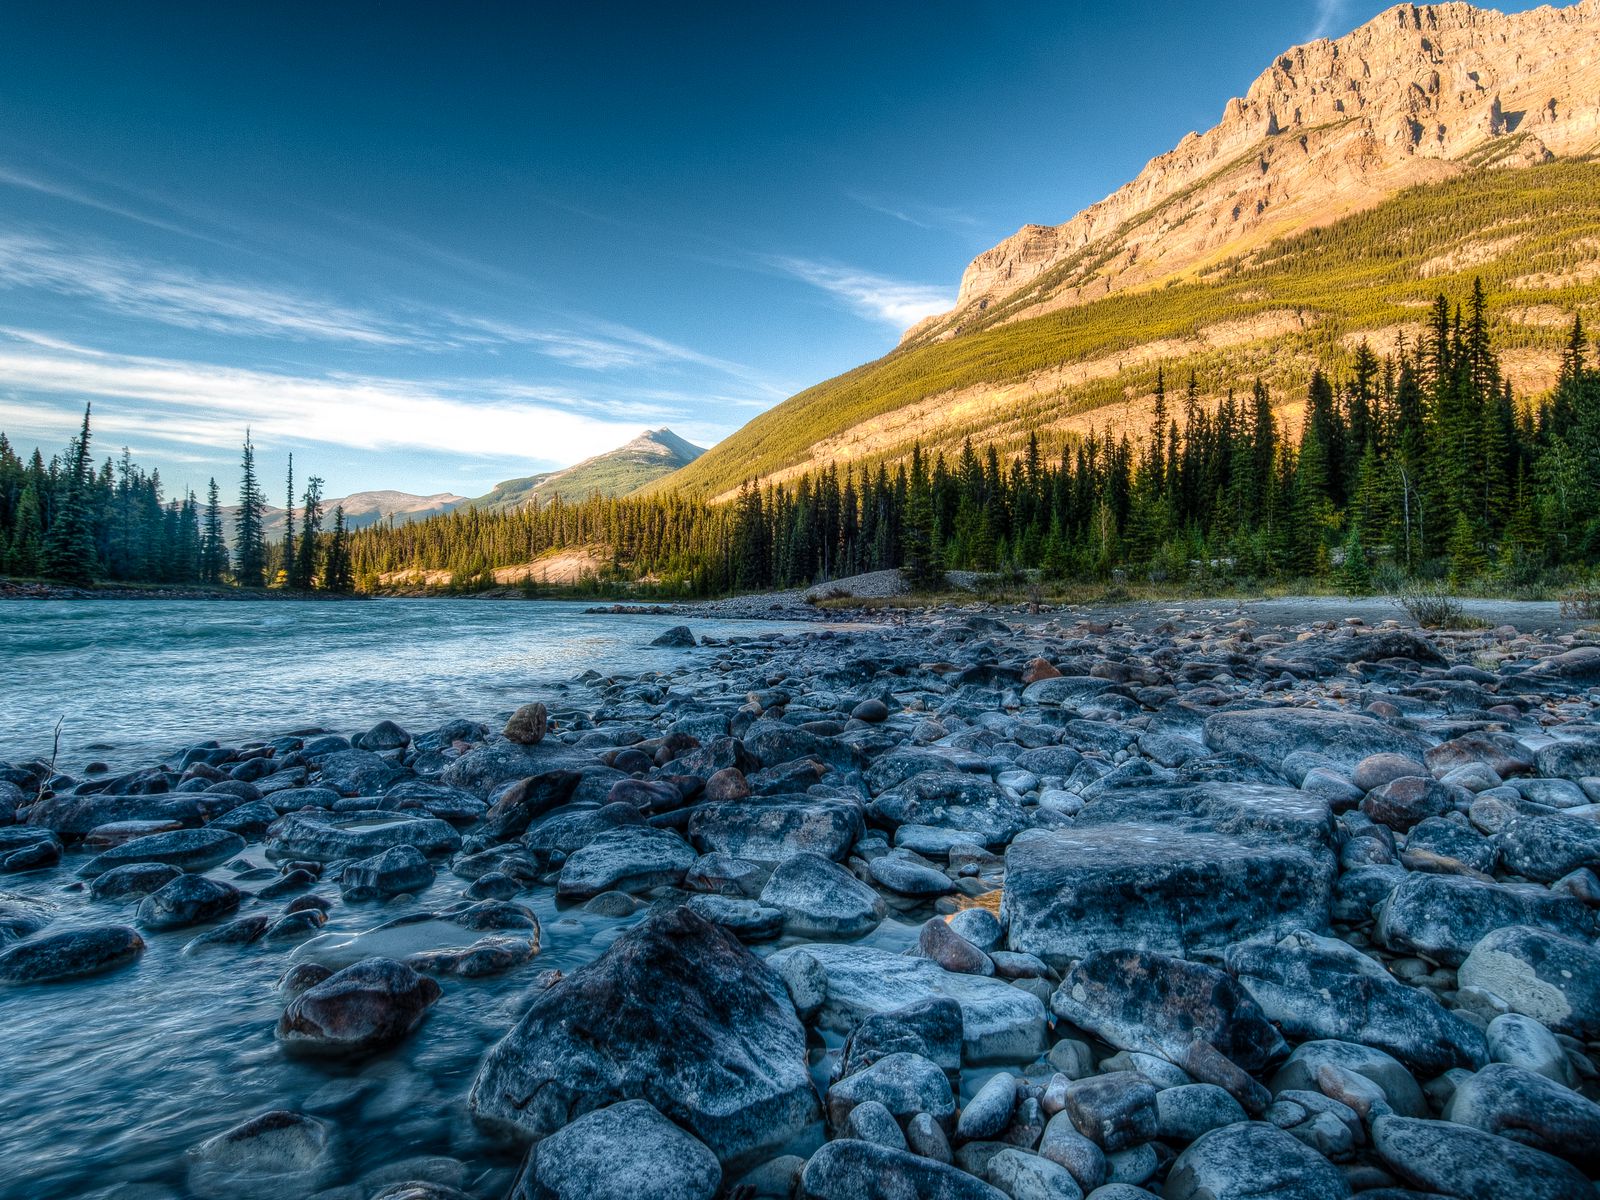 Download wallpaper 1600x1200 rocky mountains, river, stones, athabasca,  alberta, canada, hdr standard 4:3 hd background